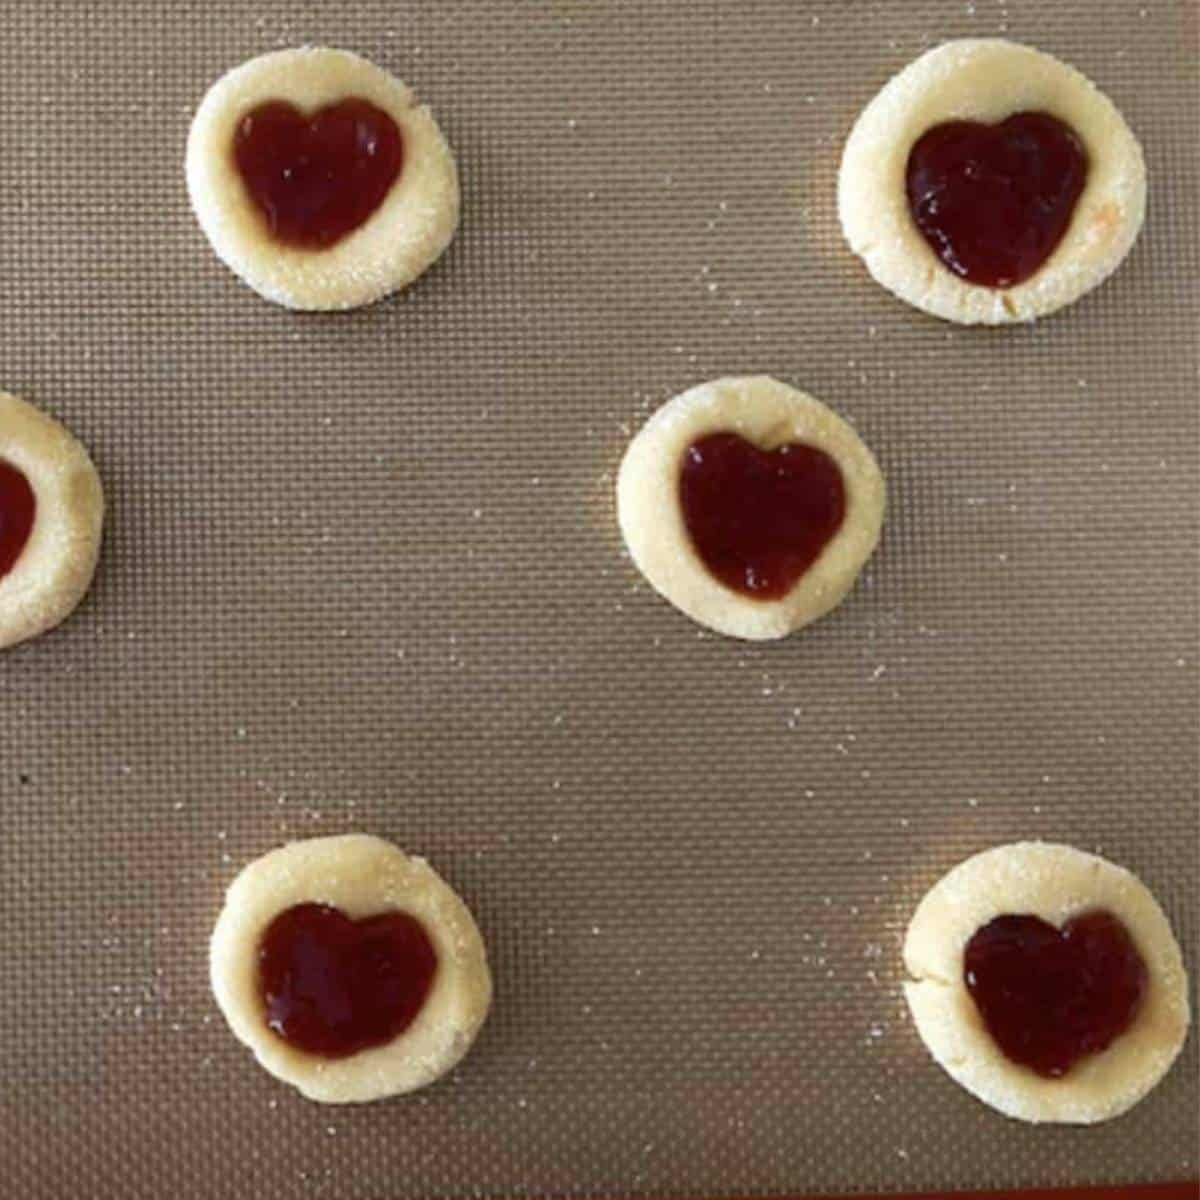 Heart jam cookies ready to bake on cookie sheet.